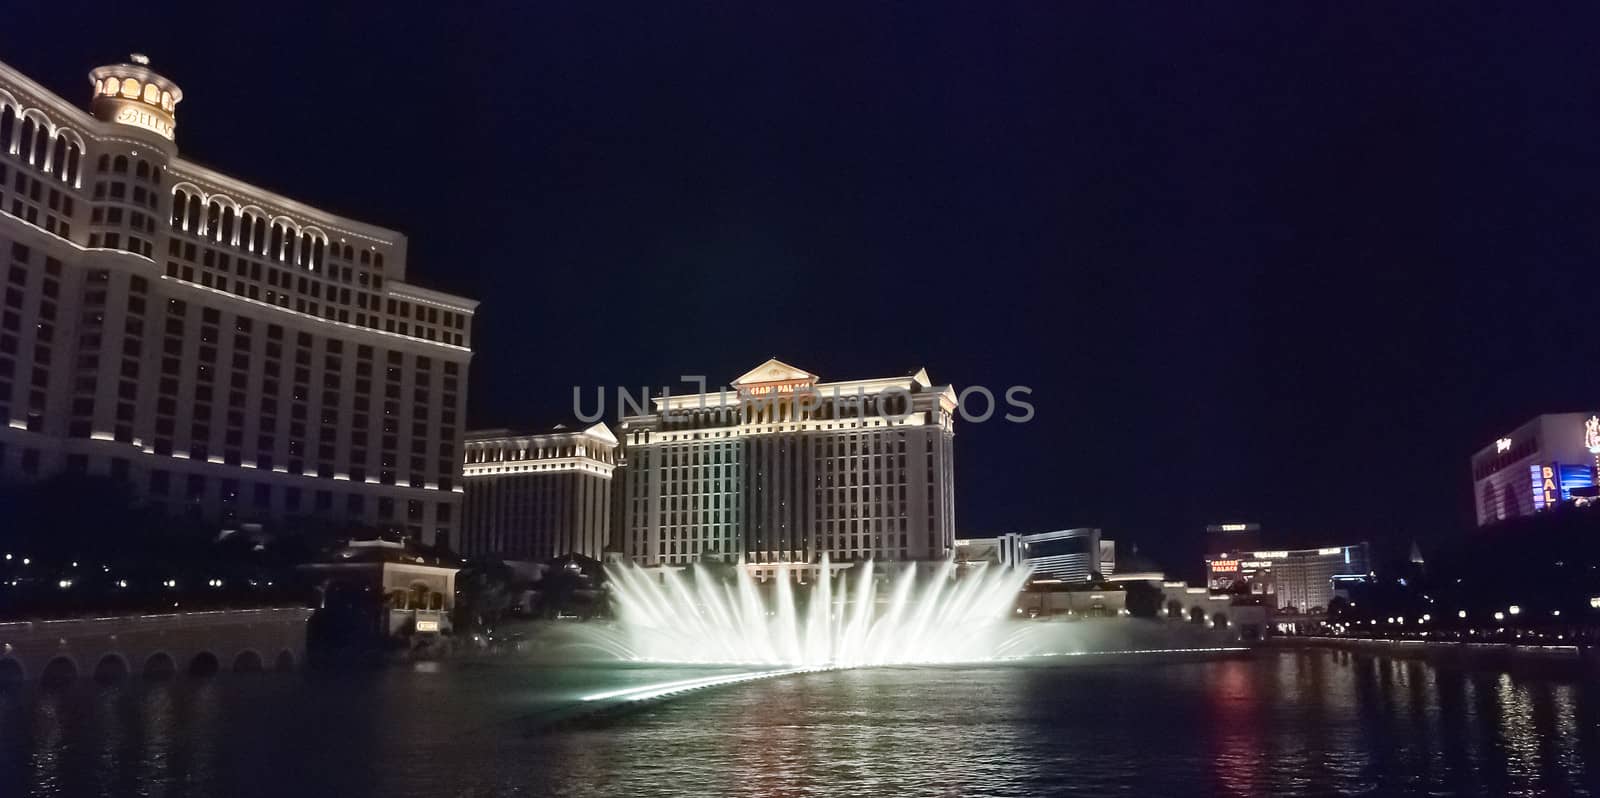 Las Vegas, Nevada, USA - September 23: The Bellagio Fountains at night on Sept 25, 2010 in Las Vegas, USA. More than 1200 dancing fountains on a lake make show of water, music and light